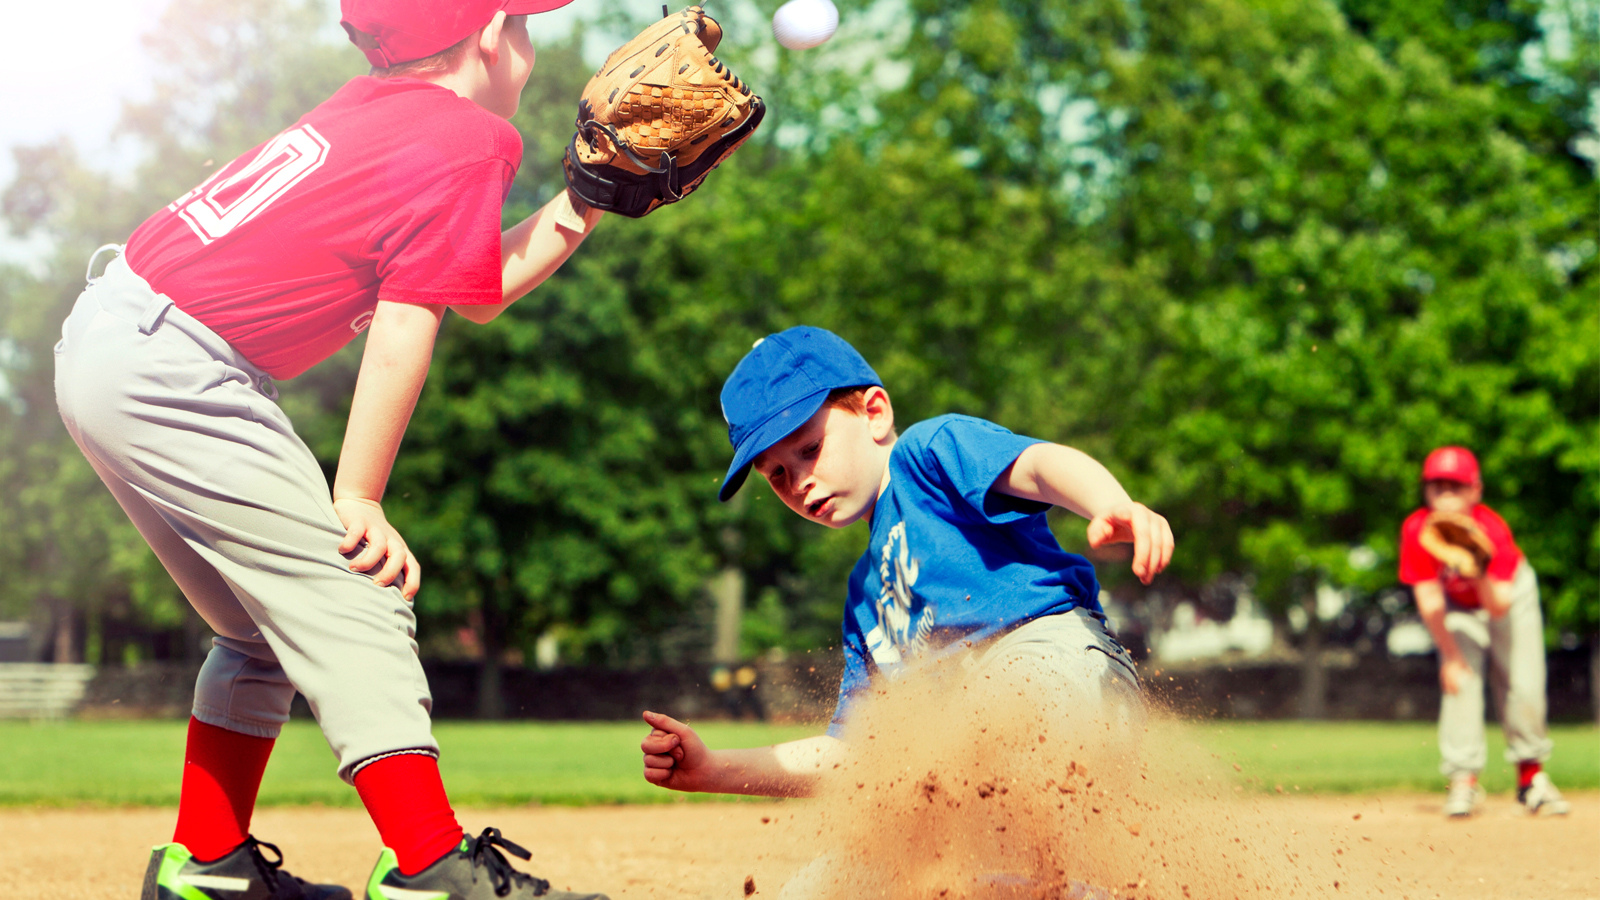 10 Reasons Why Baseball is Great for Kids